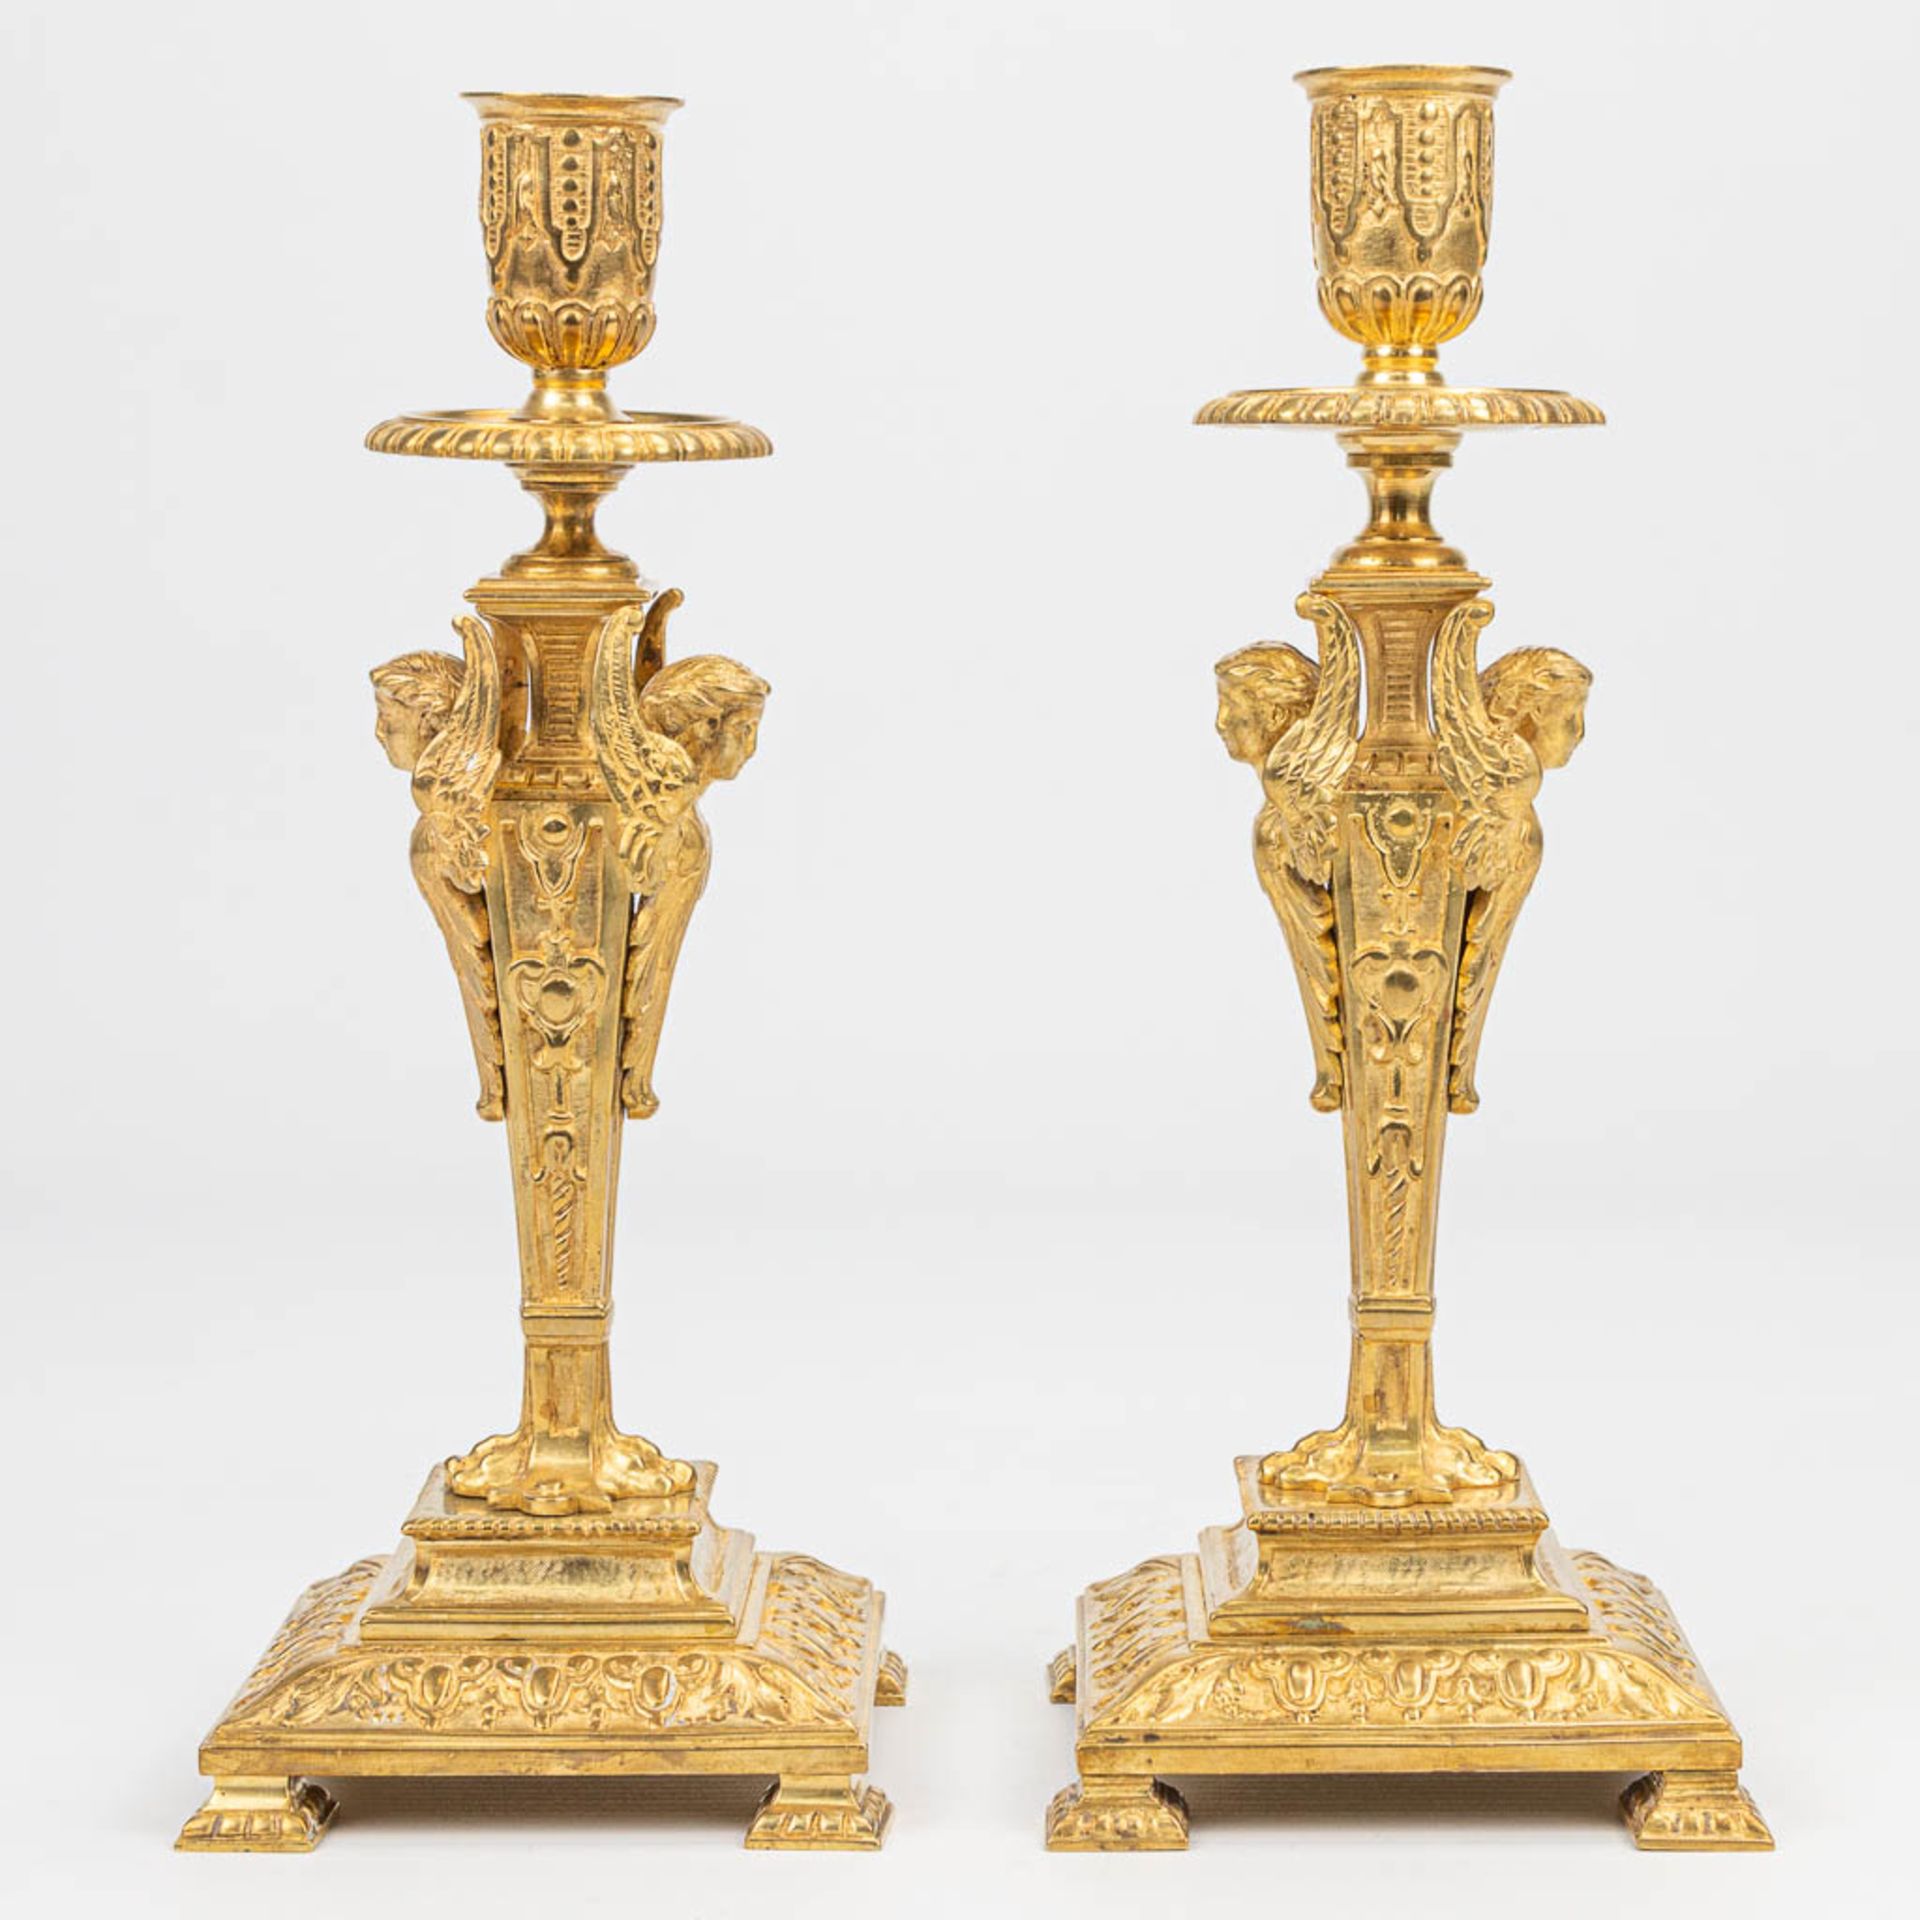 a pair of gilt Napoleon 3 bronze candlesticks, decorated with angels. (11 x 11 x 26,5 cm) - Image 5 of 6